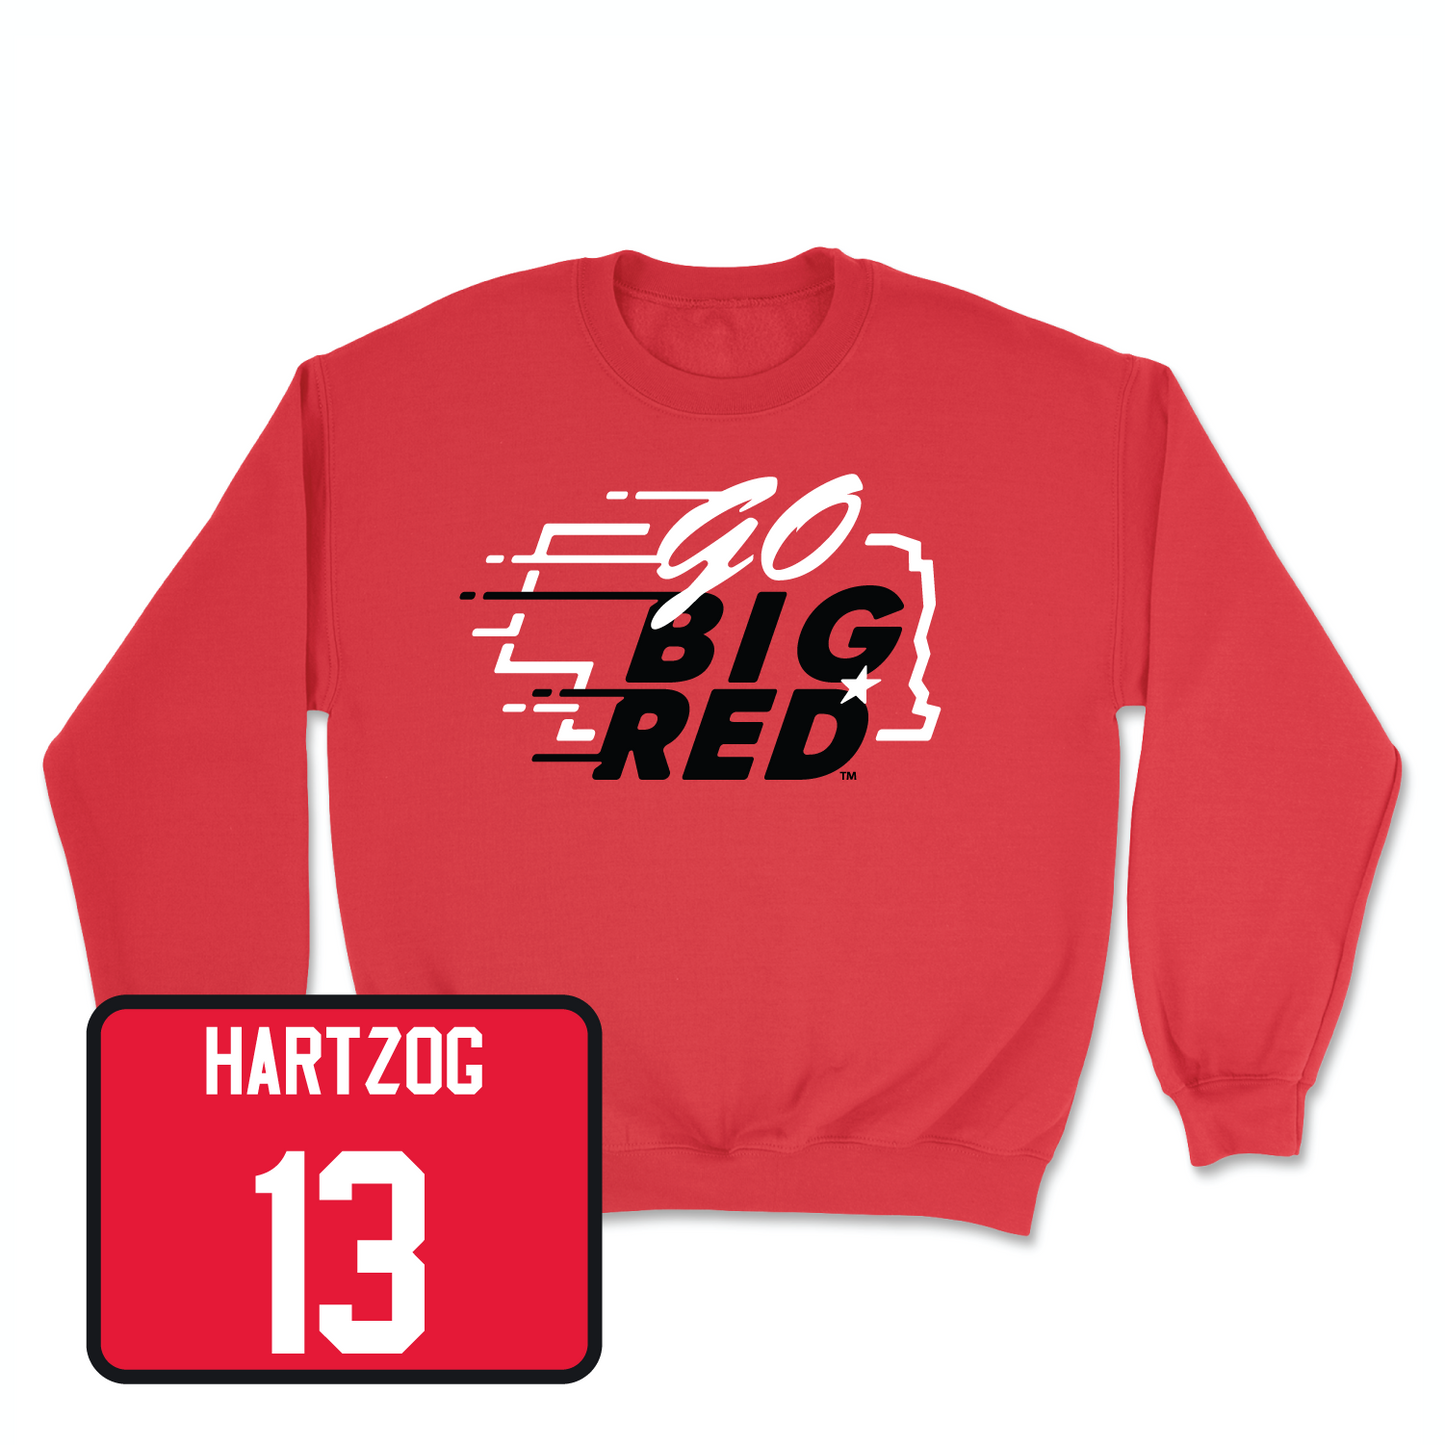 Red Football GBR Crew 2 Large / Malcolm Hartzog | #13